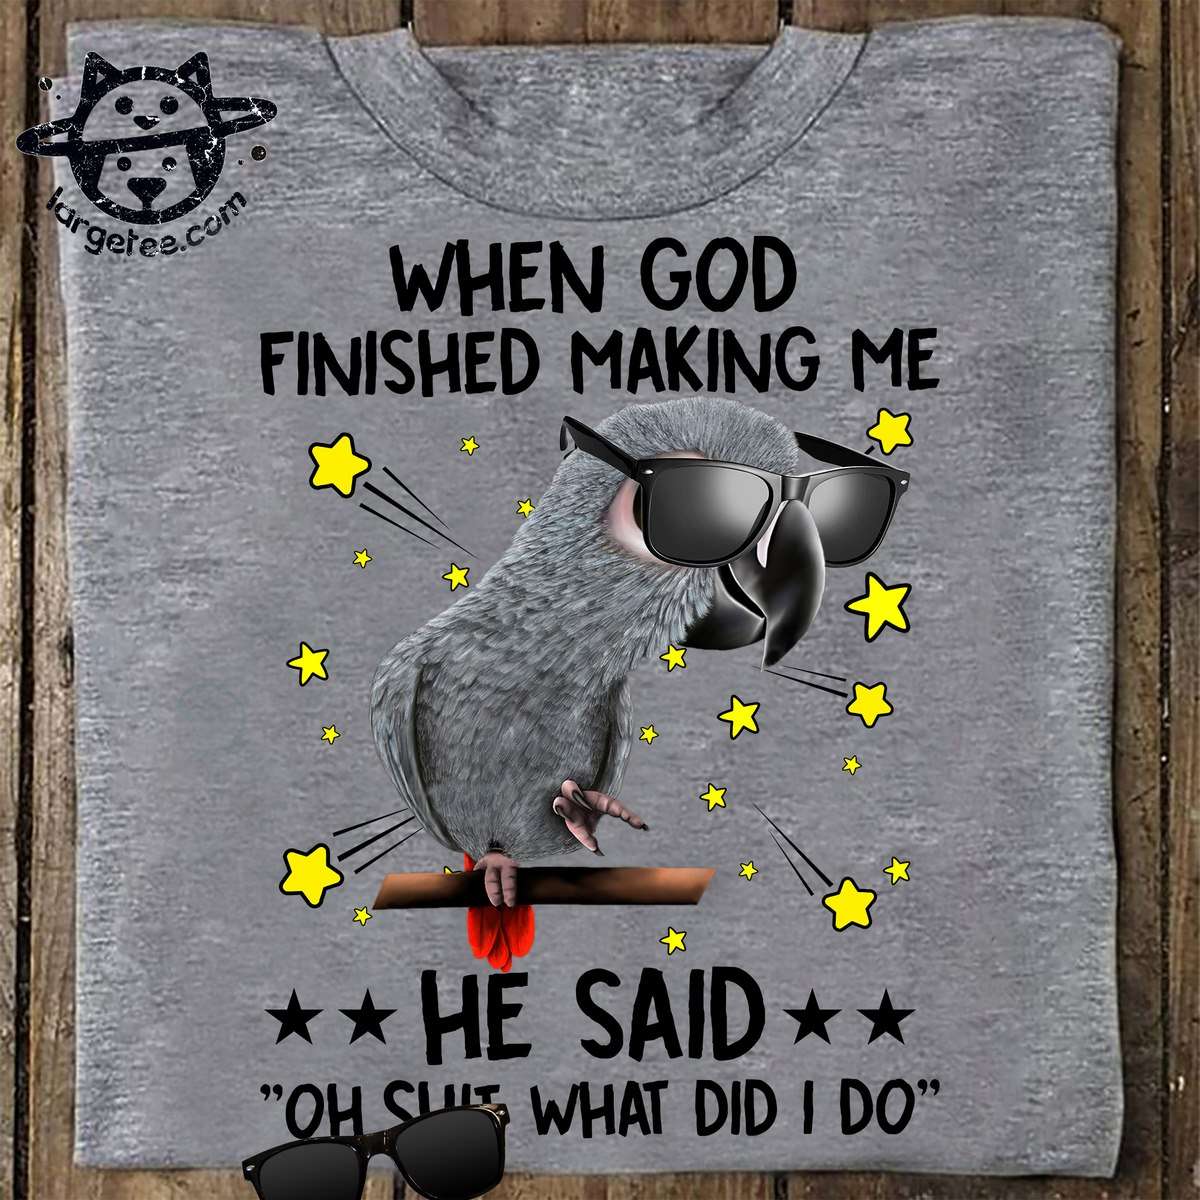 When god finished making me he said - Oh shit what did I do, parrot with sunglasses